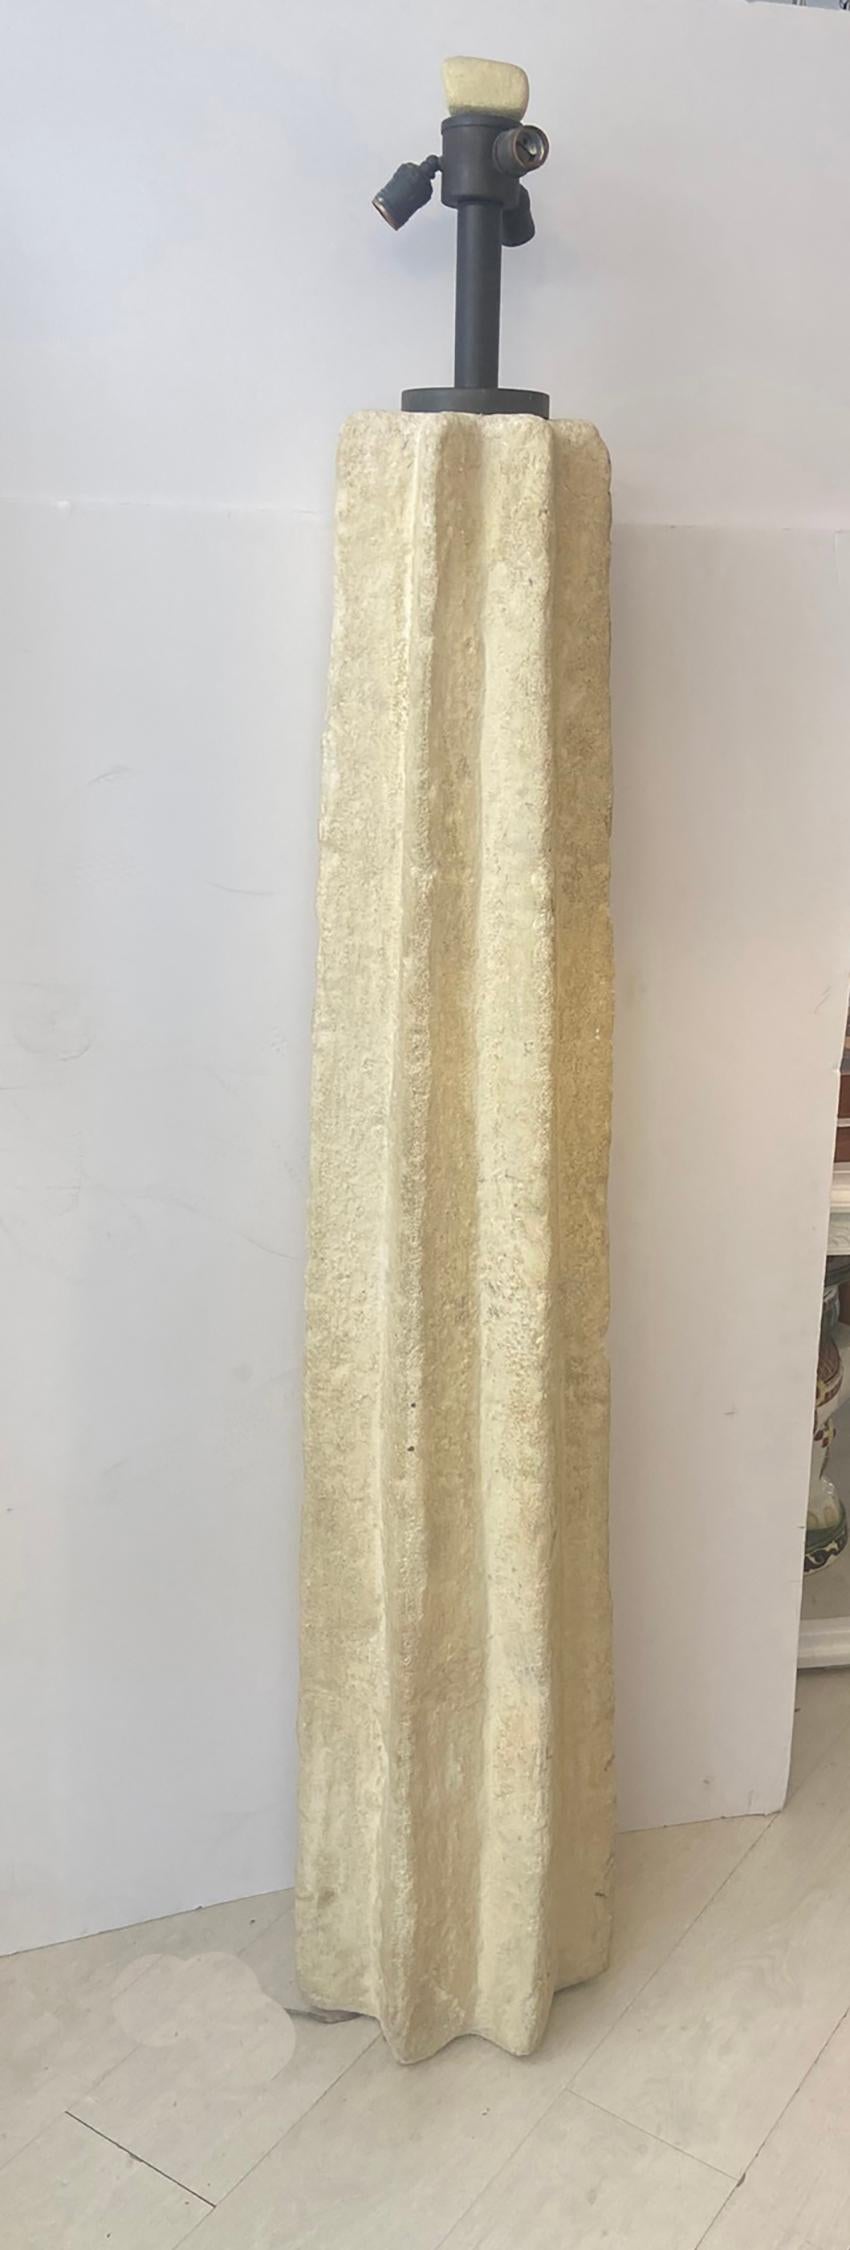 Beautiful cast stone floor lamp 14 inches wide by 14 inches deep by 74 inches high… A very large impressive lamp. Aged to a beautiful patina. 